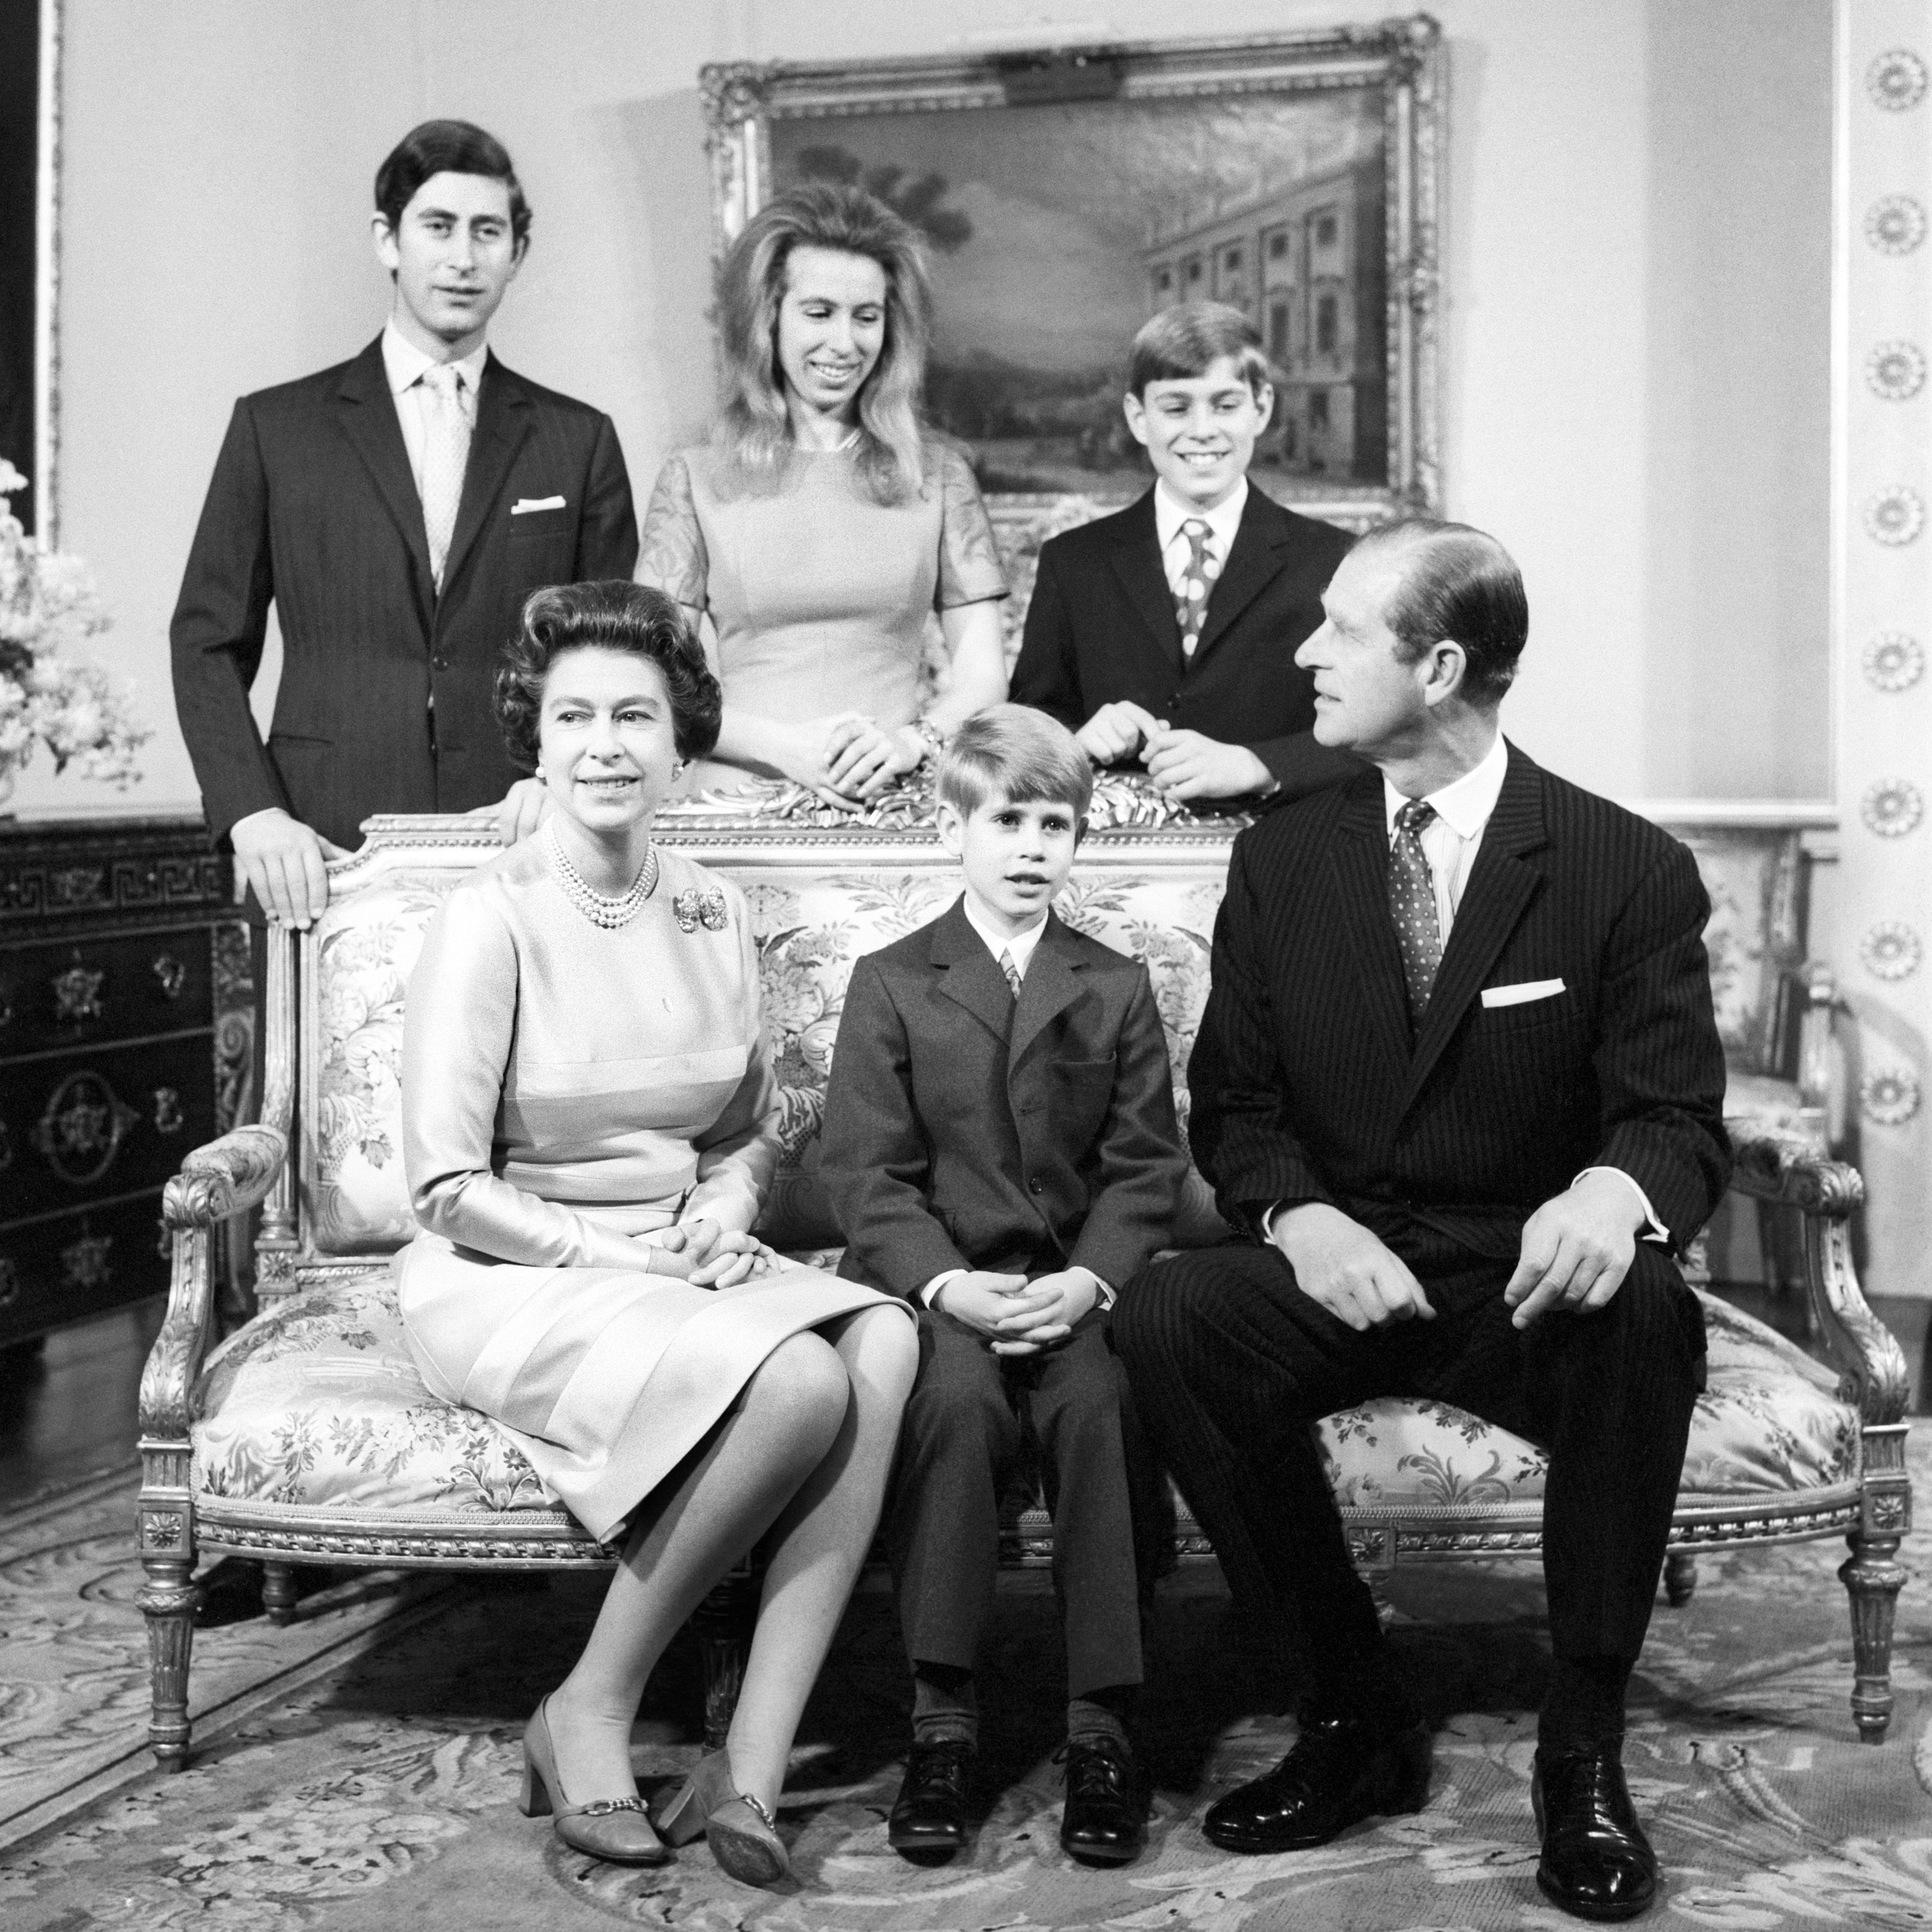 <p>Queen Elizabeth II and Prince Philip posed with their children -- Prince Charles, Princes Anne, Prince Andrew and Prince Edward -- in the Belgian suite at Buckingham Palace for a silver wedding anniversary portrait marking 25 years of marriage on Nov. 20, 1972.</p>